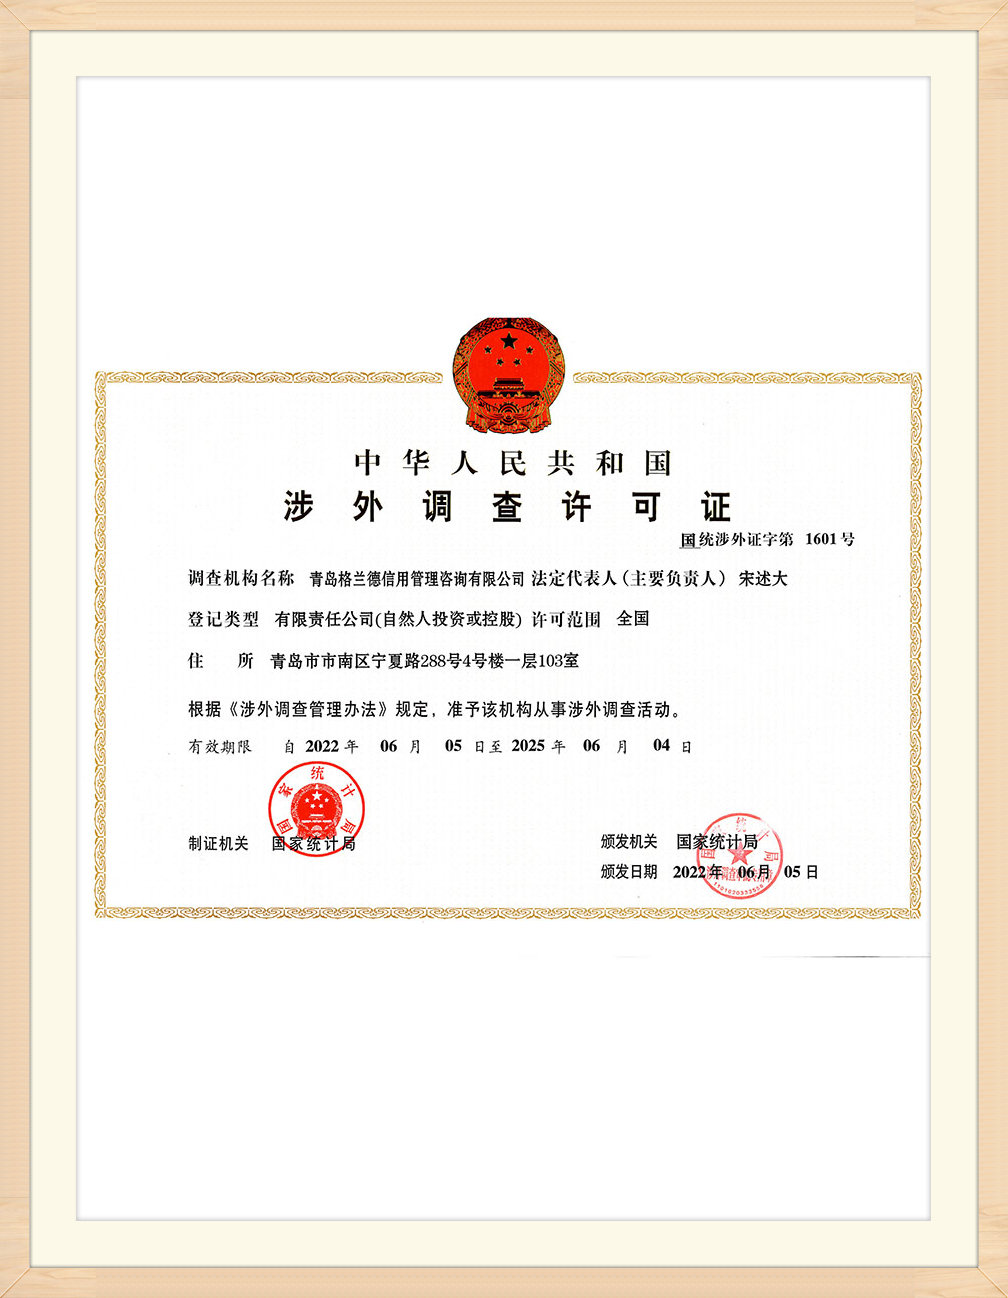 Foreign-related Investigation Certificate